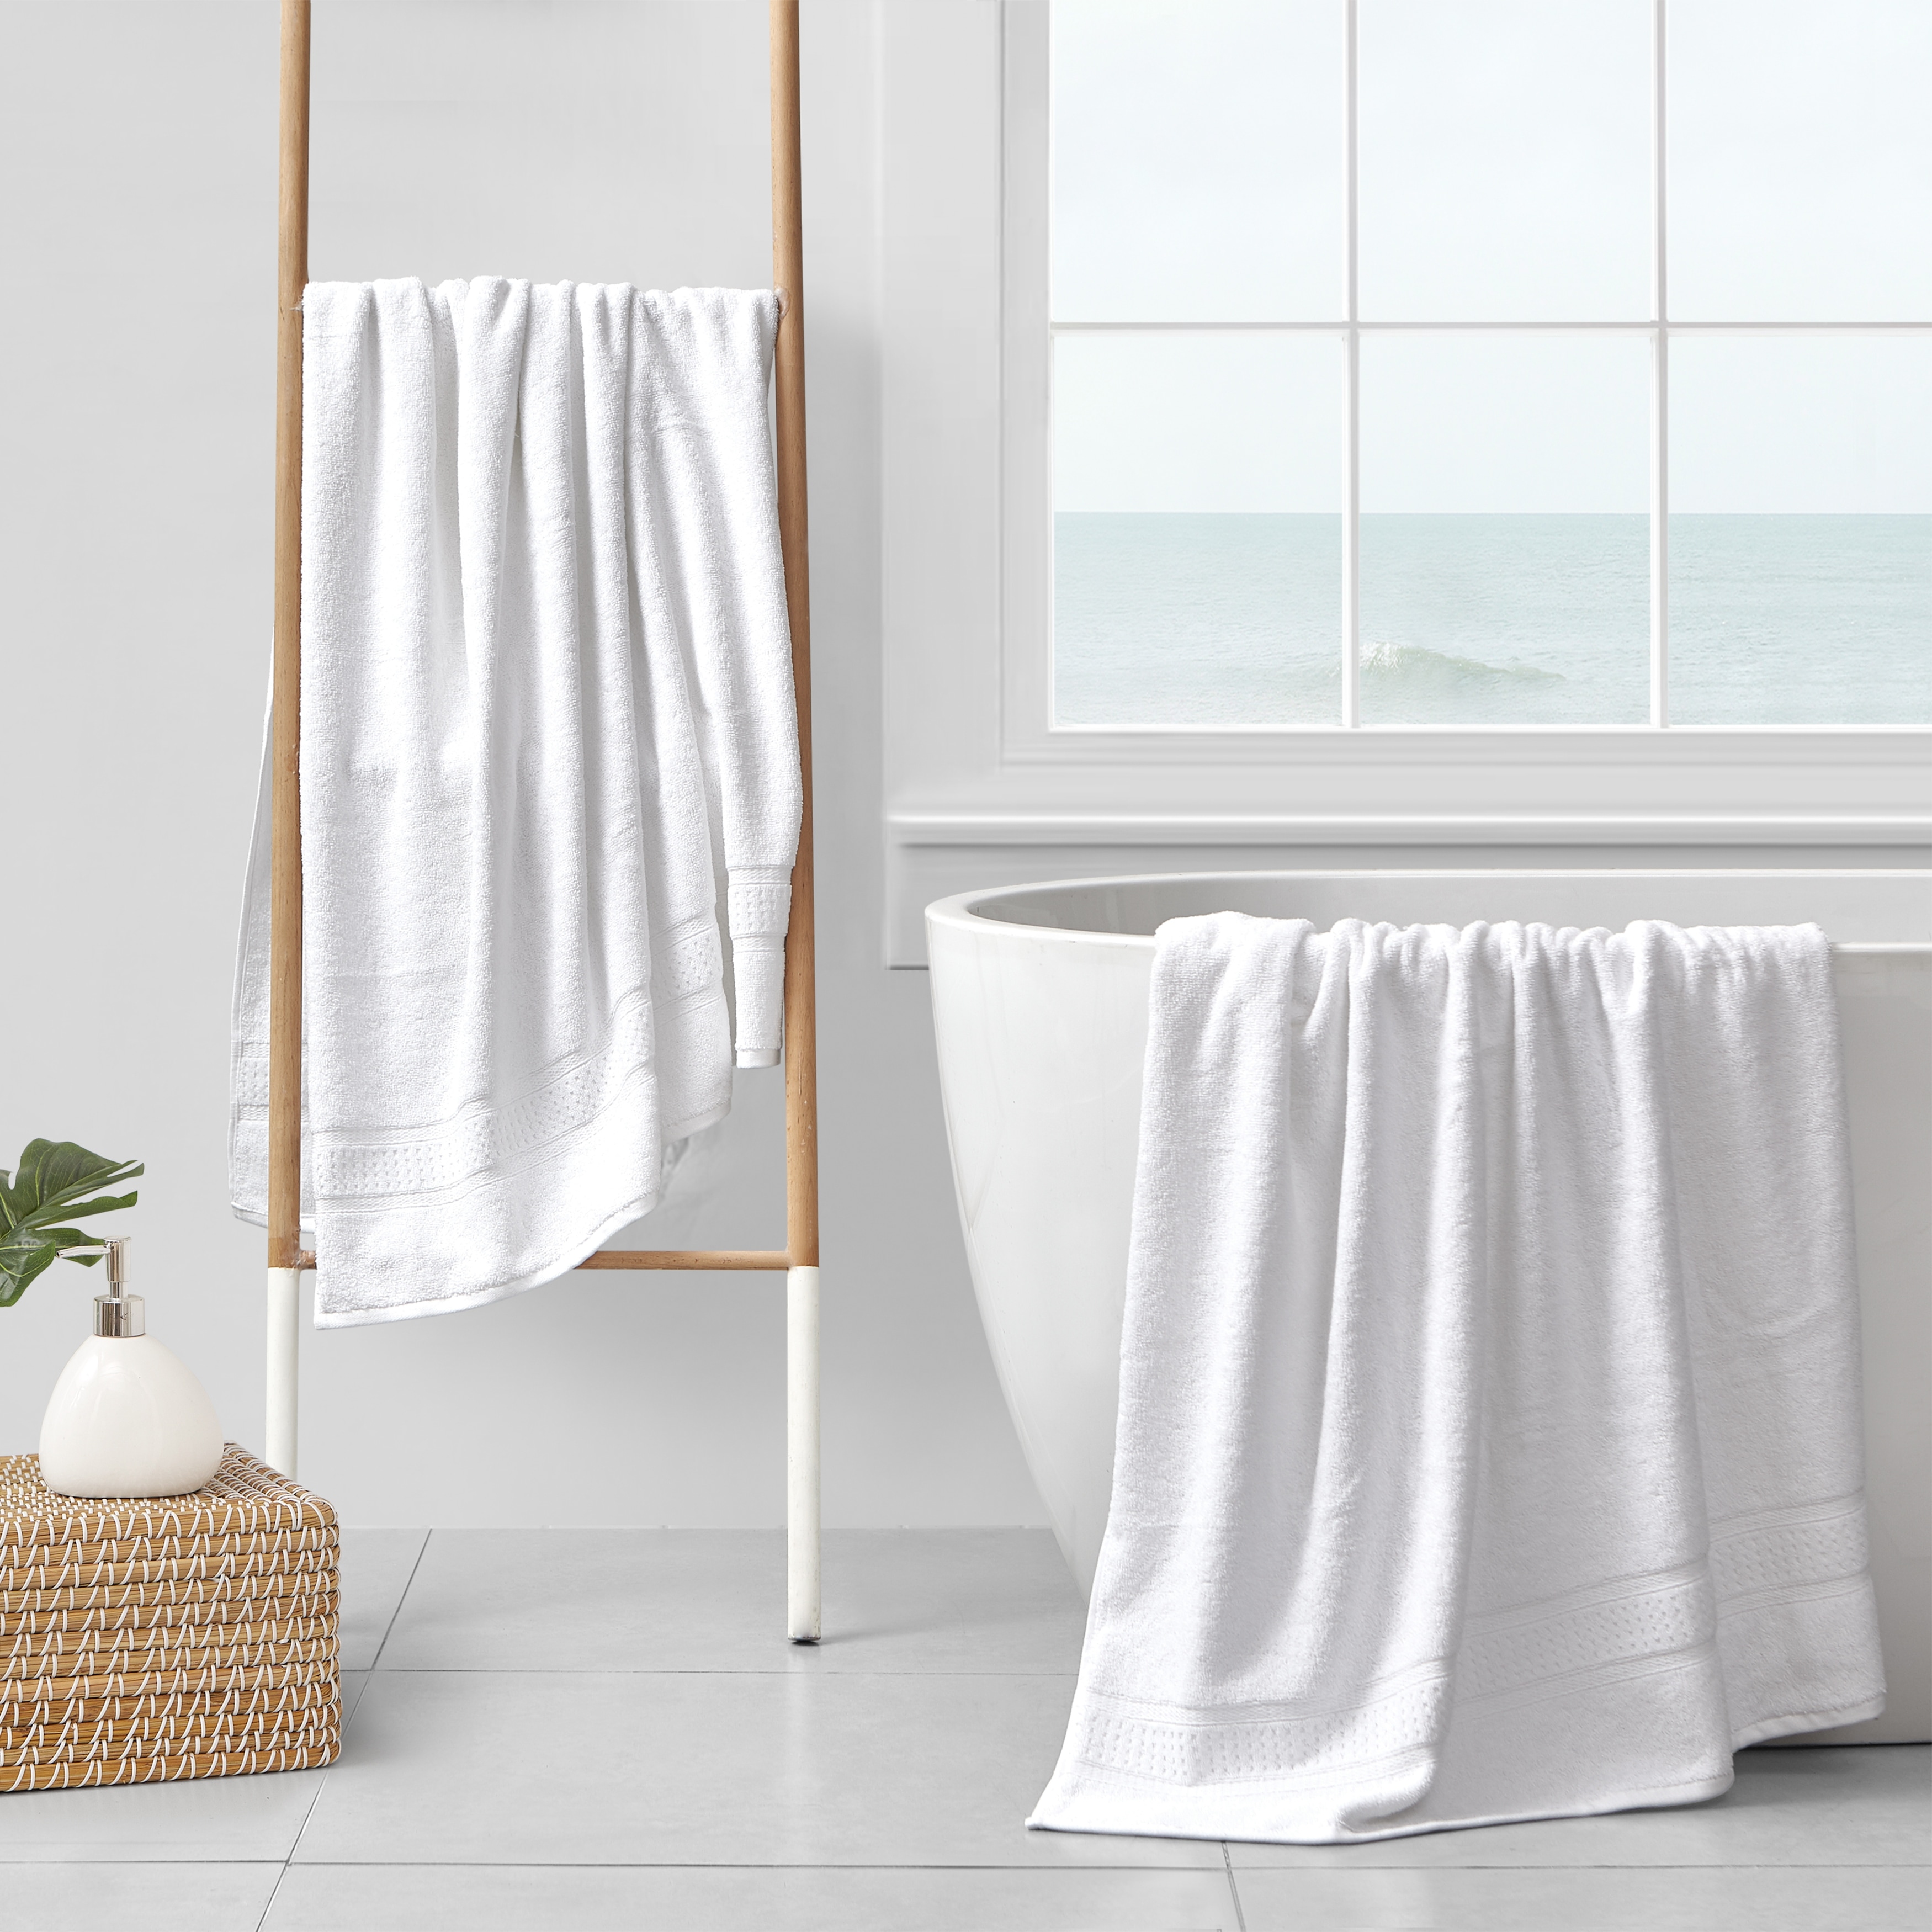 https://ak1.ostkcdn.com/images/products/is/images/direct/468a938500d3135ec0cf6be1fdd012a103682f4e/Nautica-Oceane-Solid-Wellness-Towel-Collection.jpg